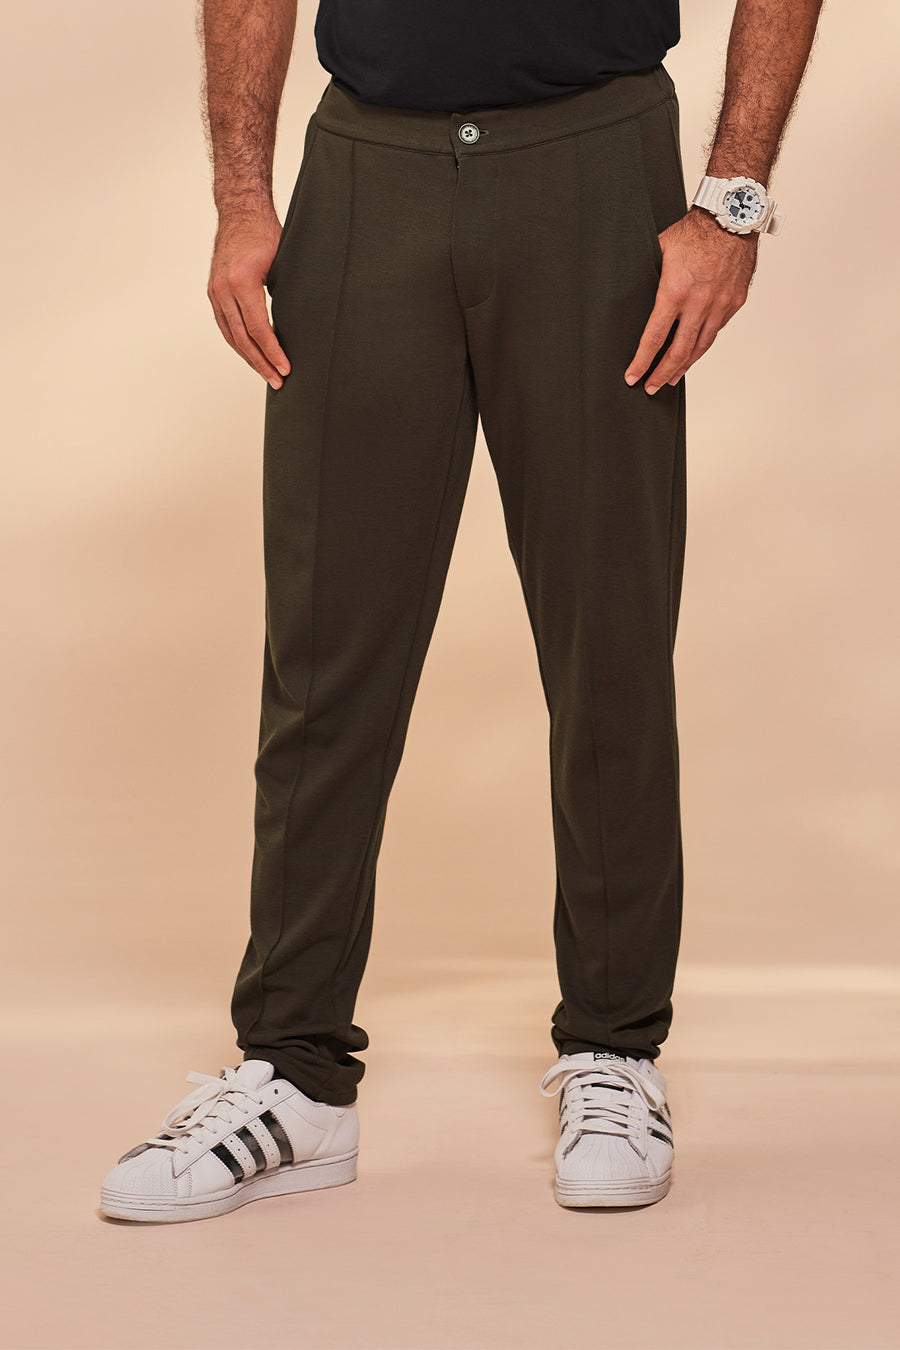 In & Out Hybrid Pant Olive Green